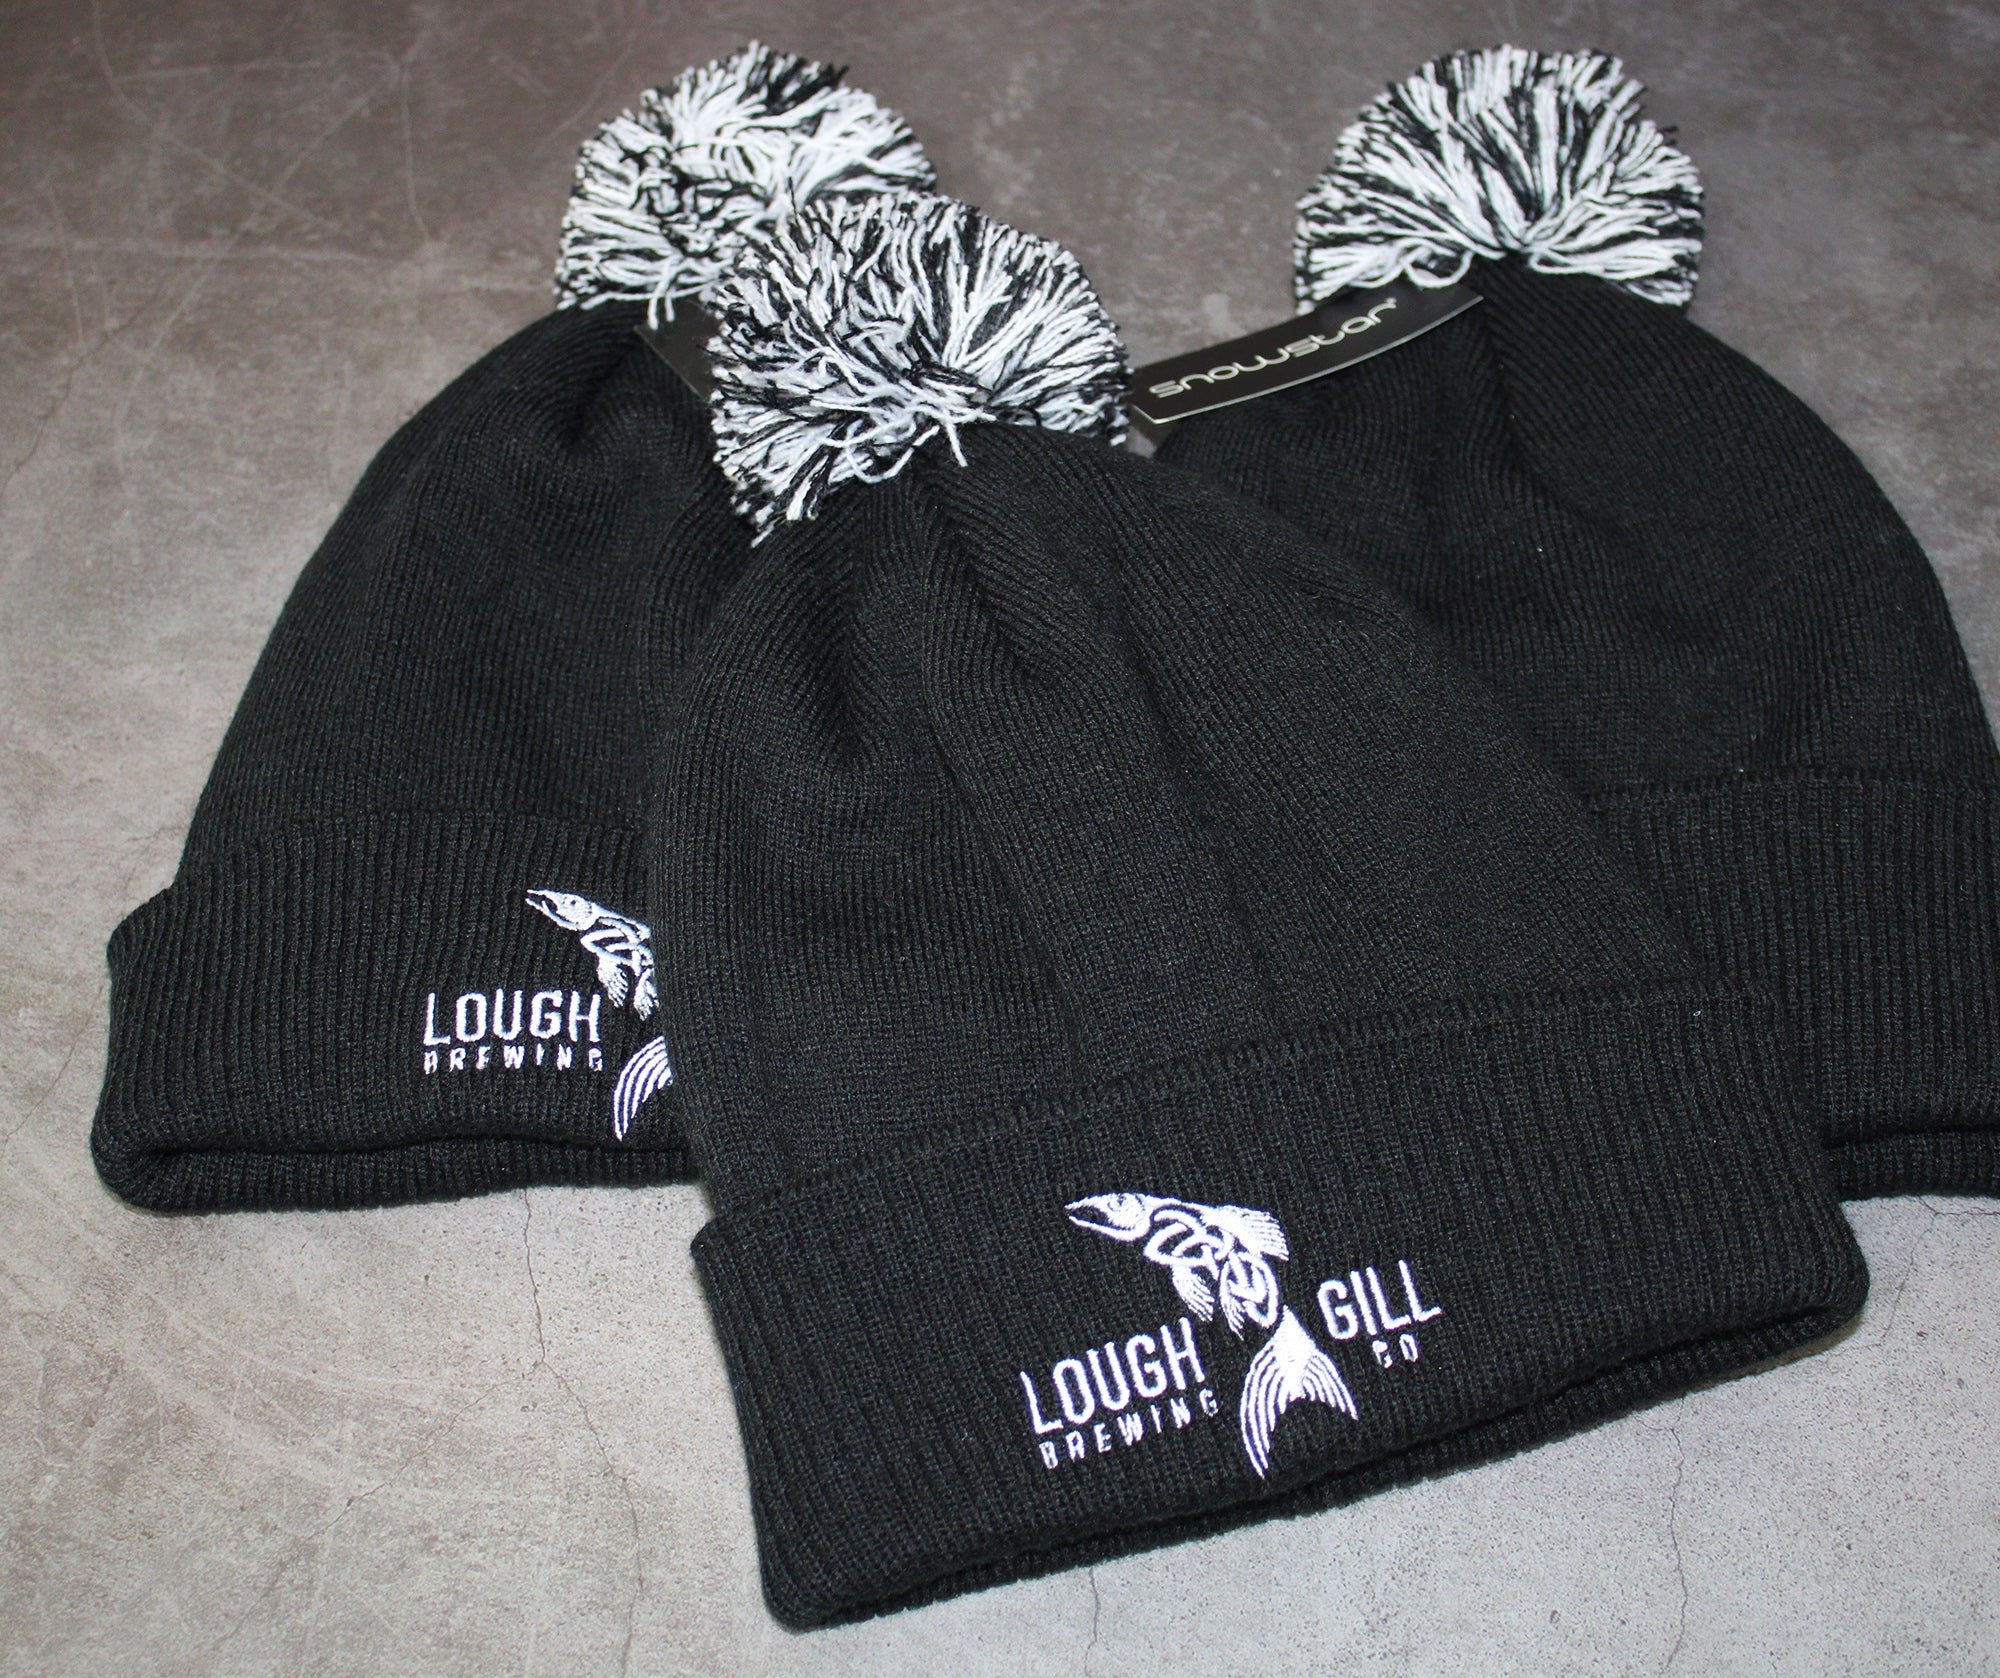 winter beanie branded lough gill brewery